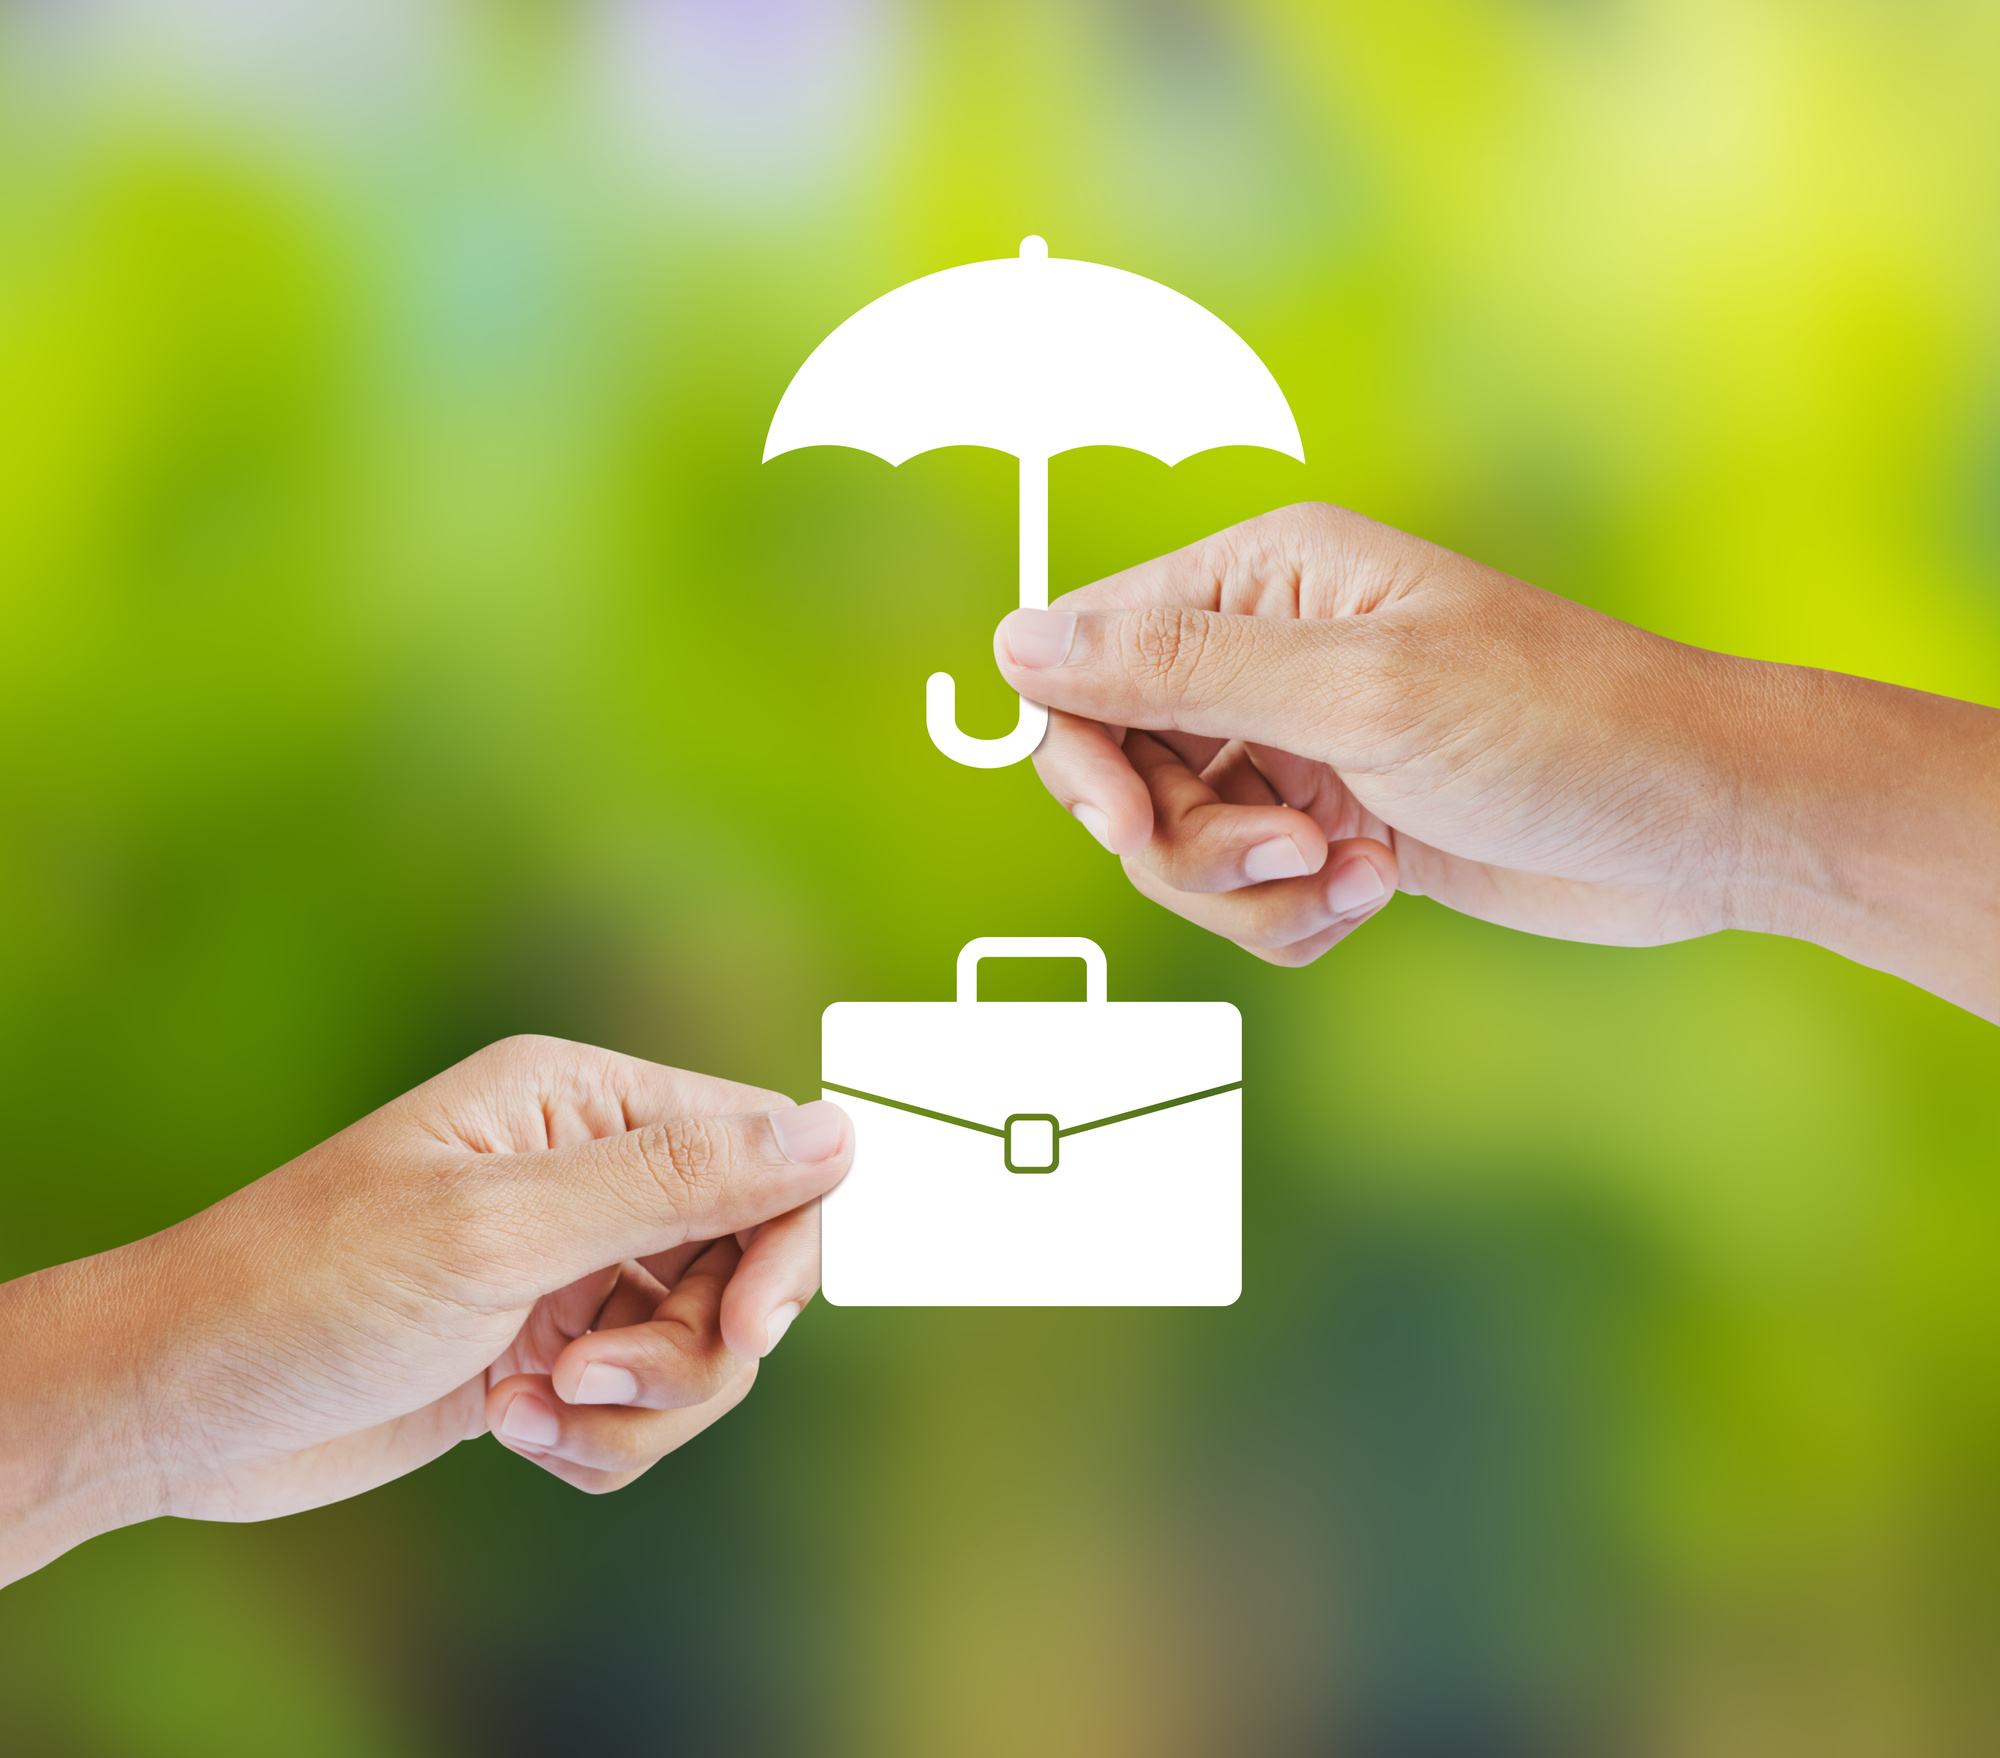 Financial Insurance Planning: Why the Often Overlooked Benefits Should Matter to You